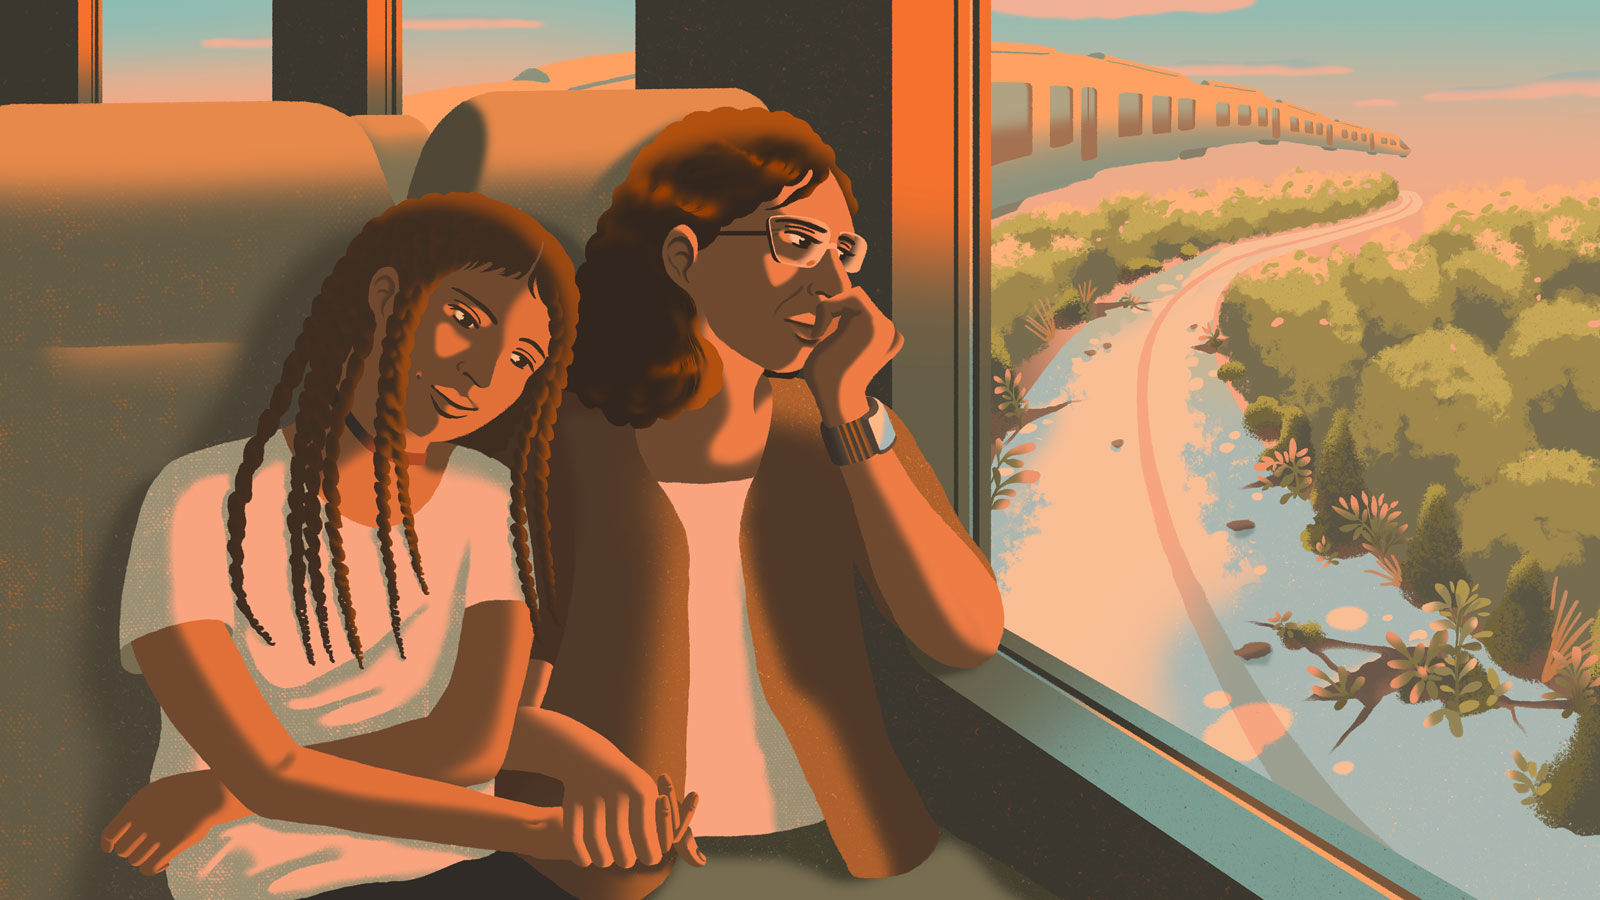 Illustration of mother and child on flying train, passing over an overgrown highway